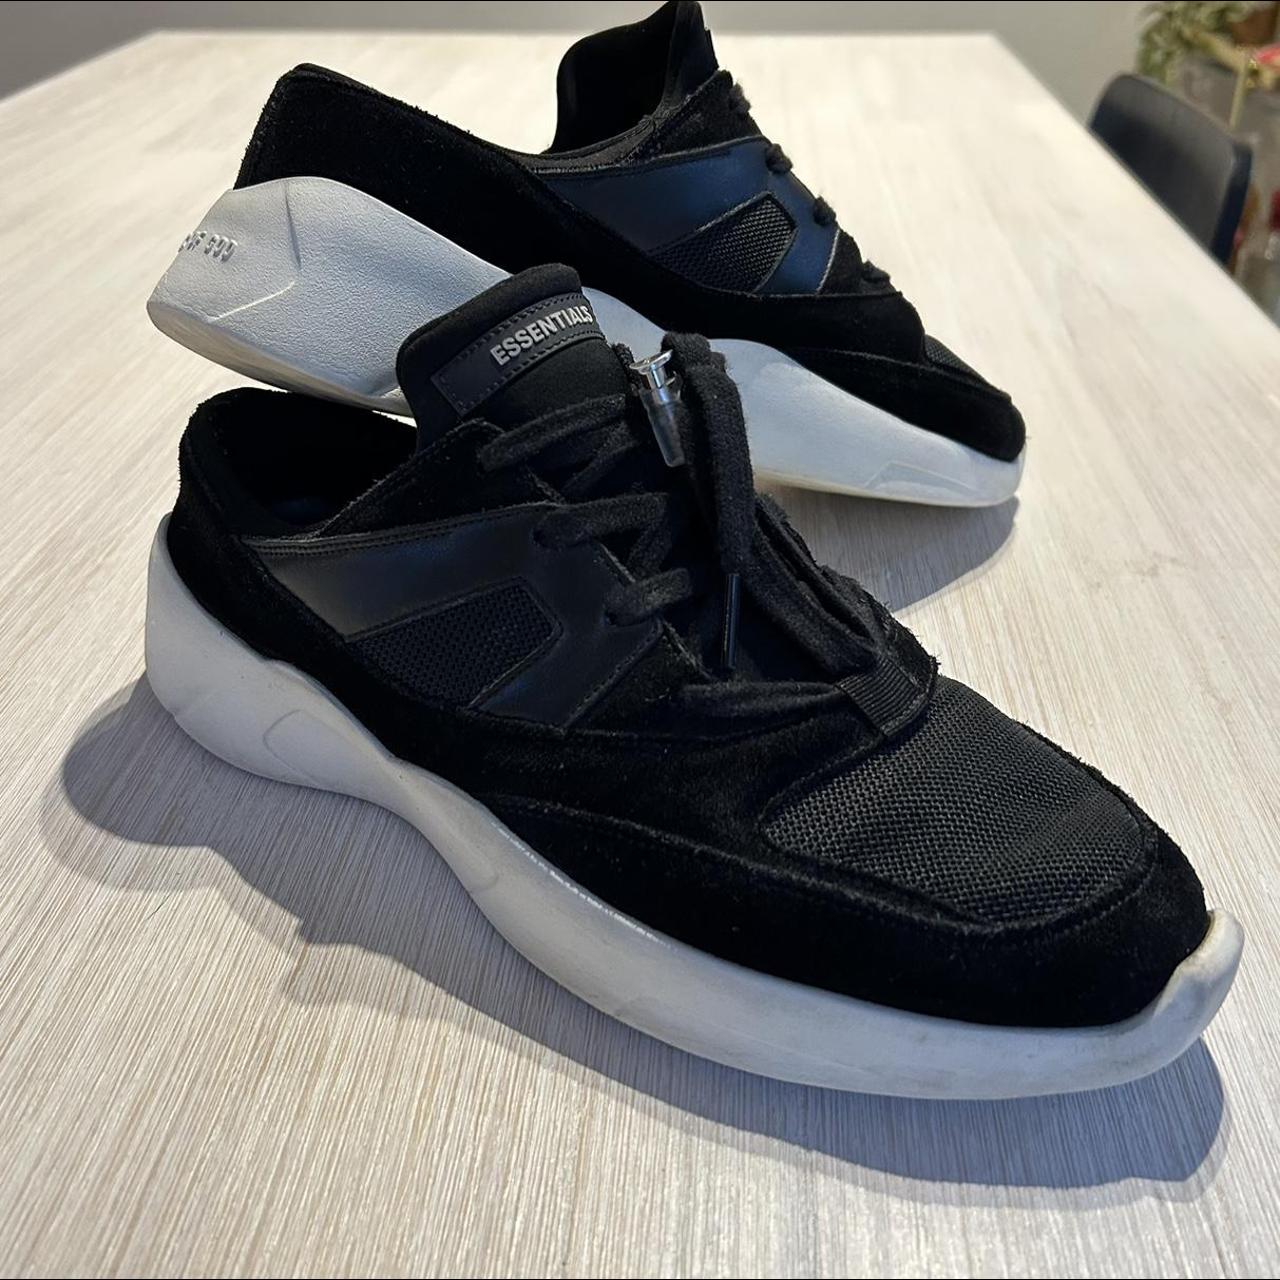 Fear Of God x Essentials Shoes Size 11US - Depop